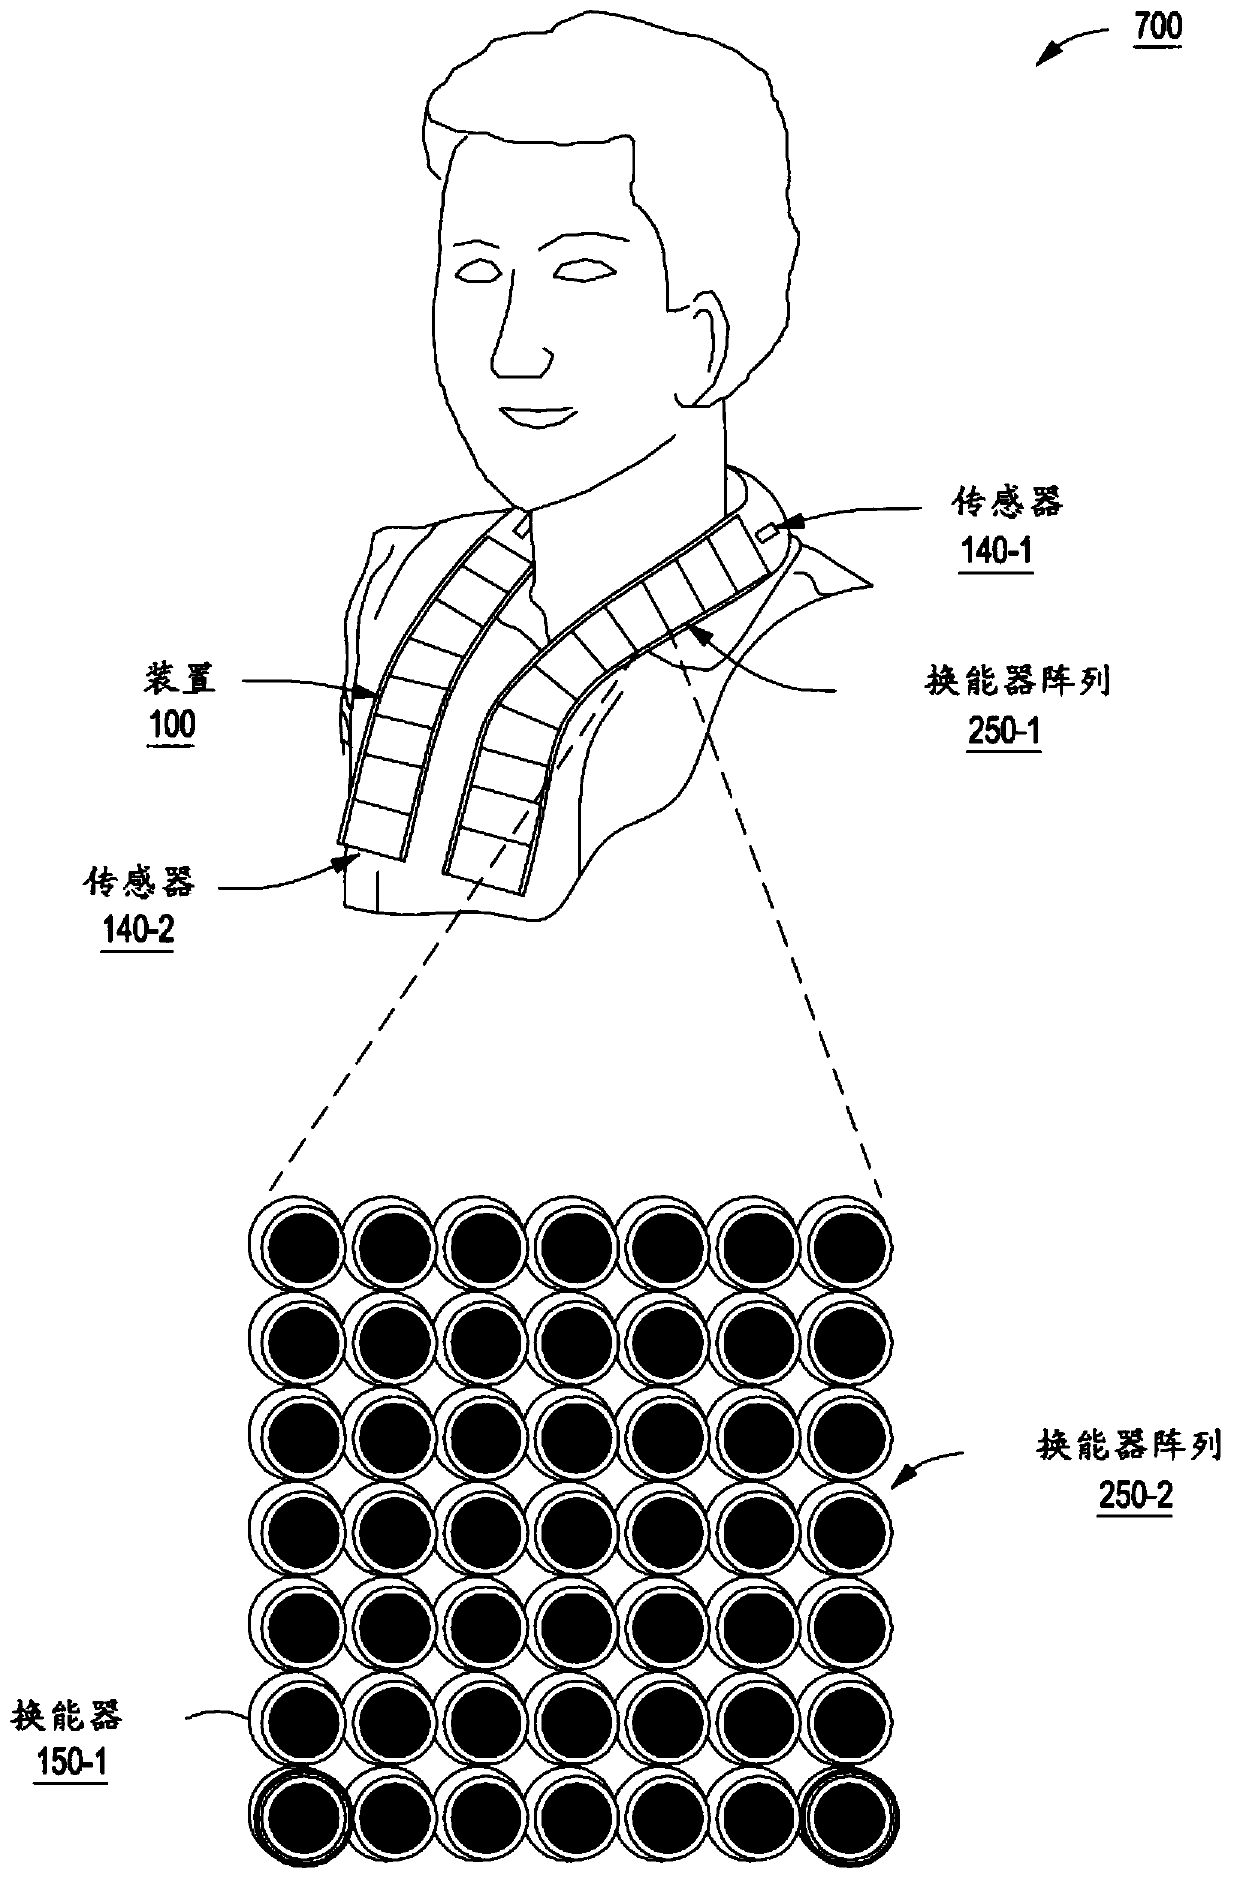 Haptics device for producing directional sound and haptic sensations